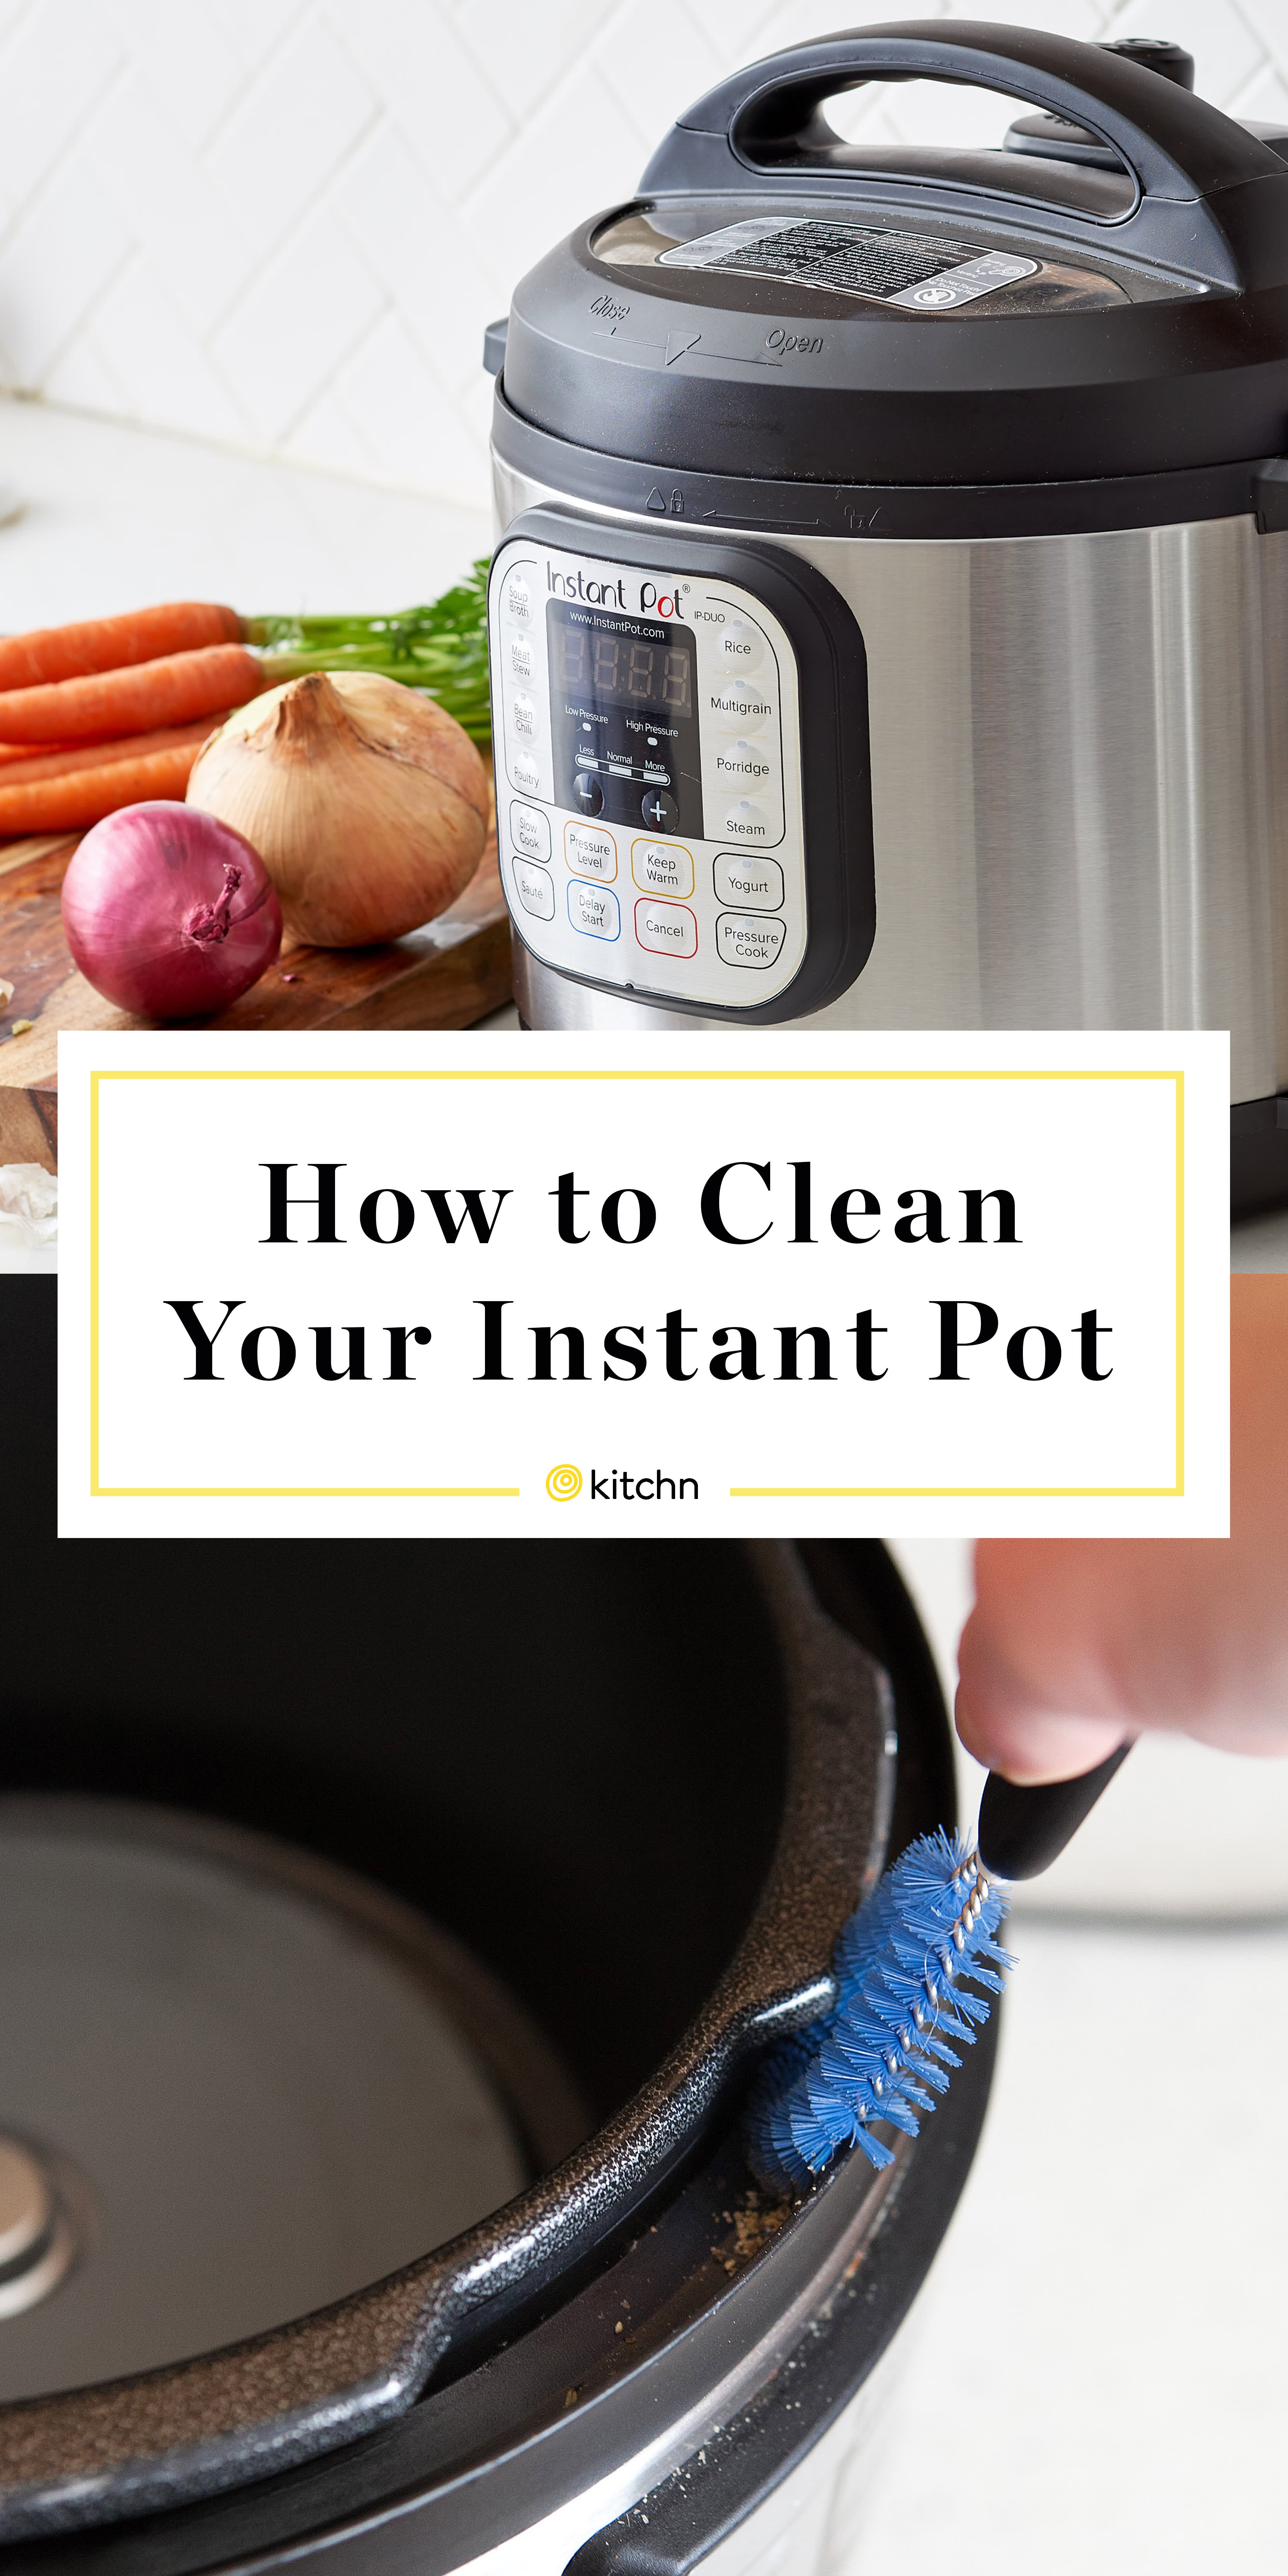 How To Clean an Instant Pot  Kitchn